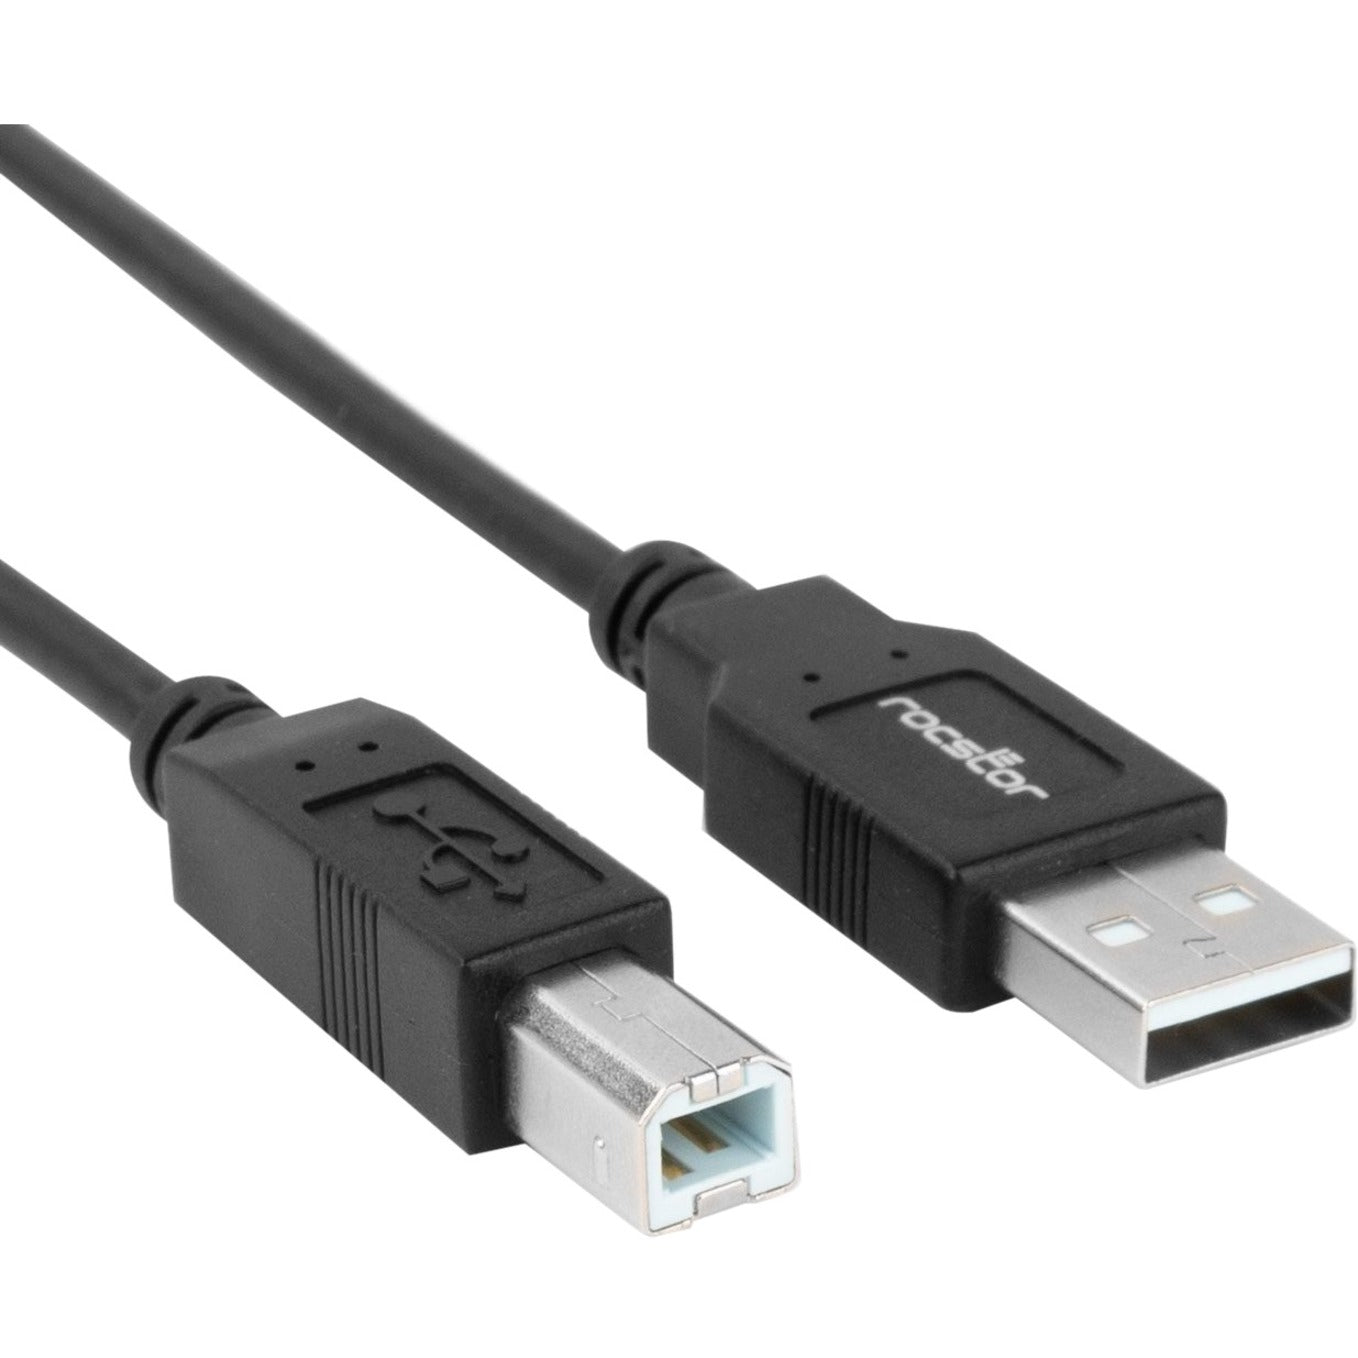 Rocstor Y10C116-B1 Premium 6 ft USB 2.0 Type-A to Type-B Cable - M/M, Data Transfer Cable